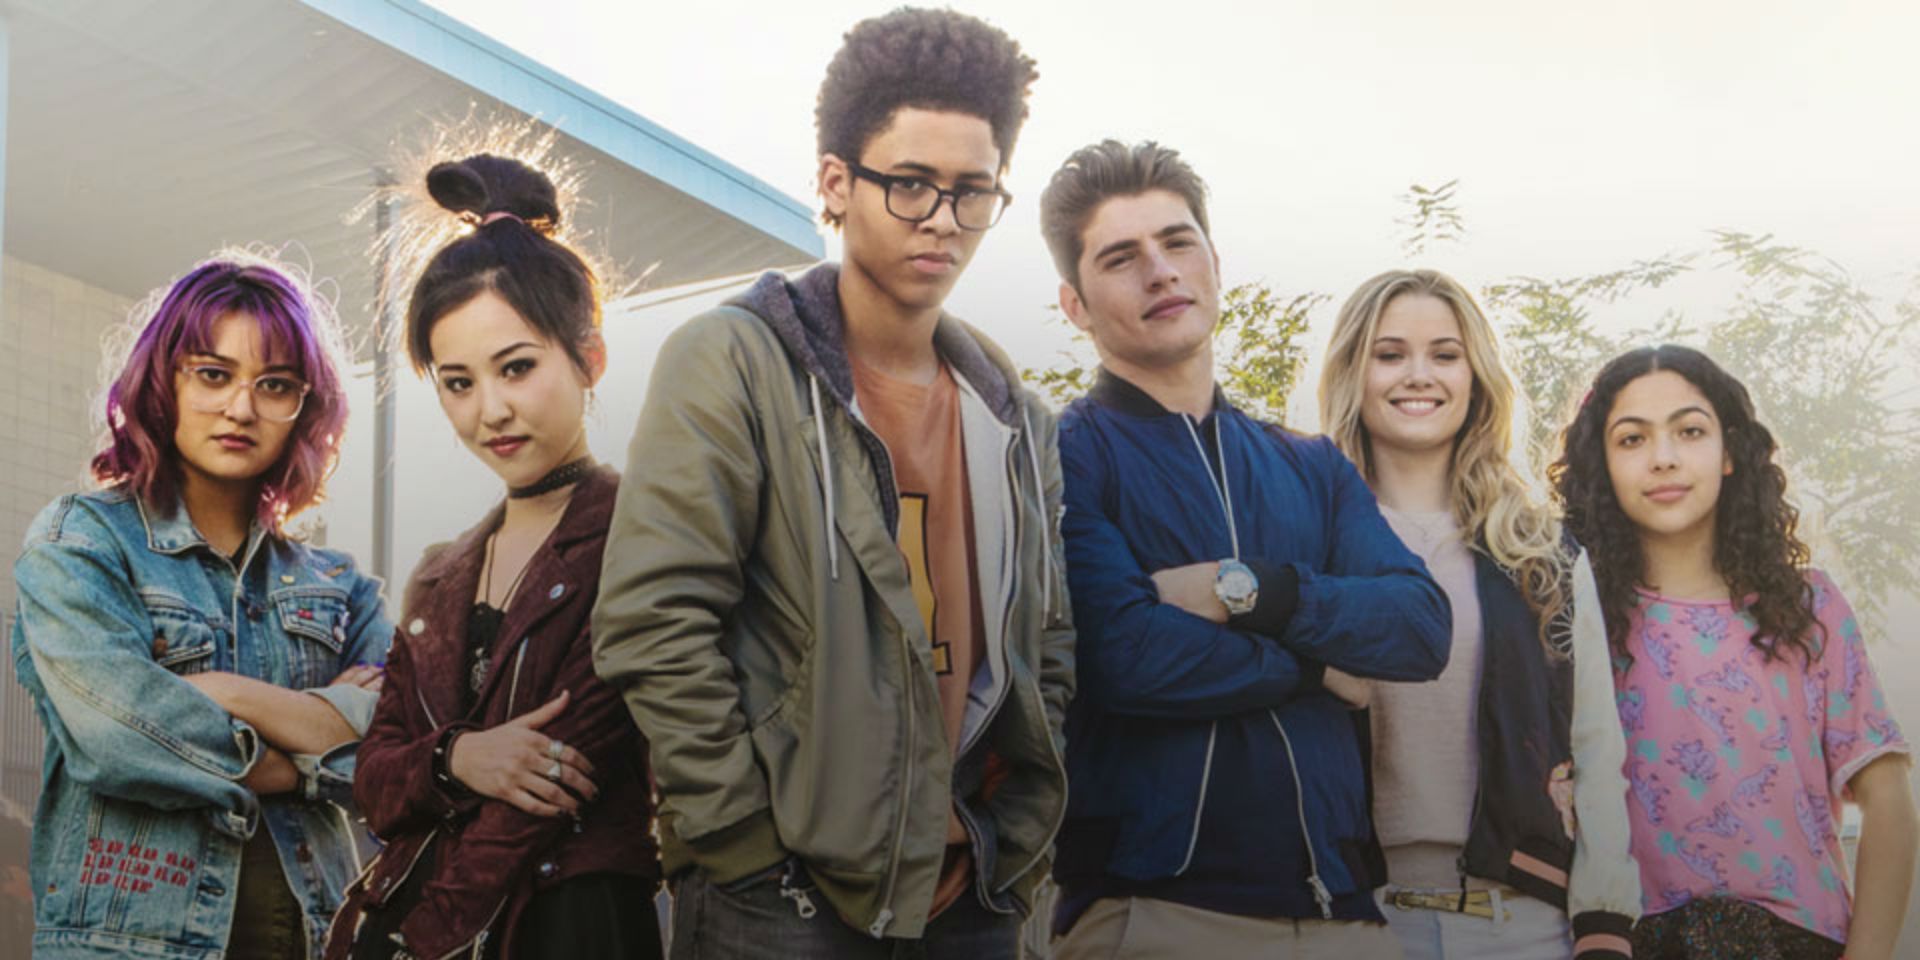 Cast of characters from Marvel's Runaways.